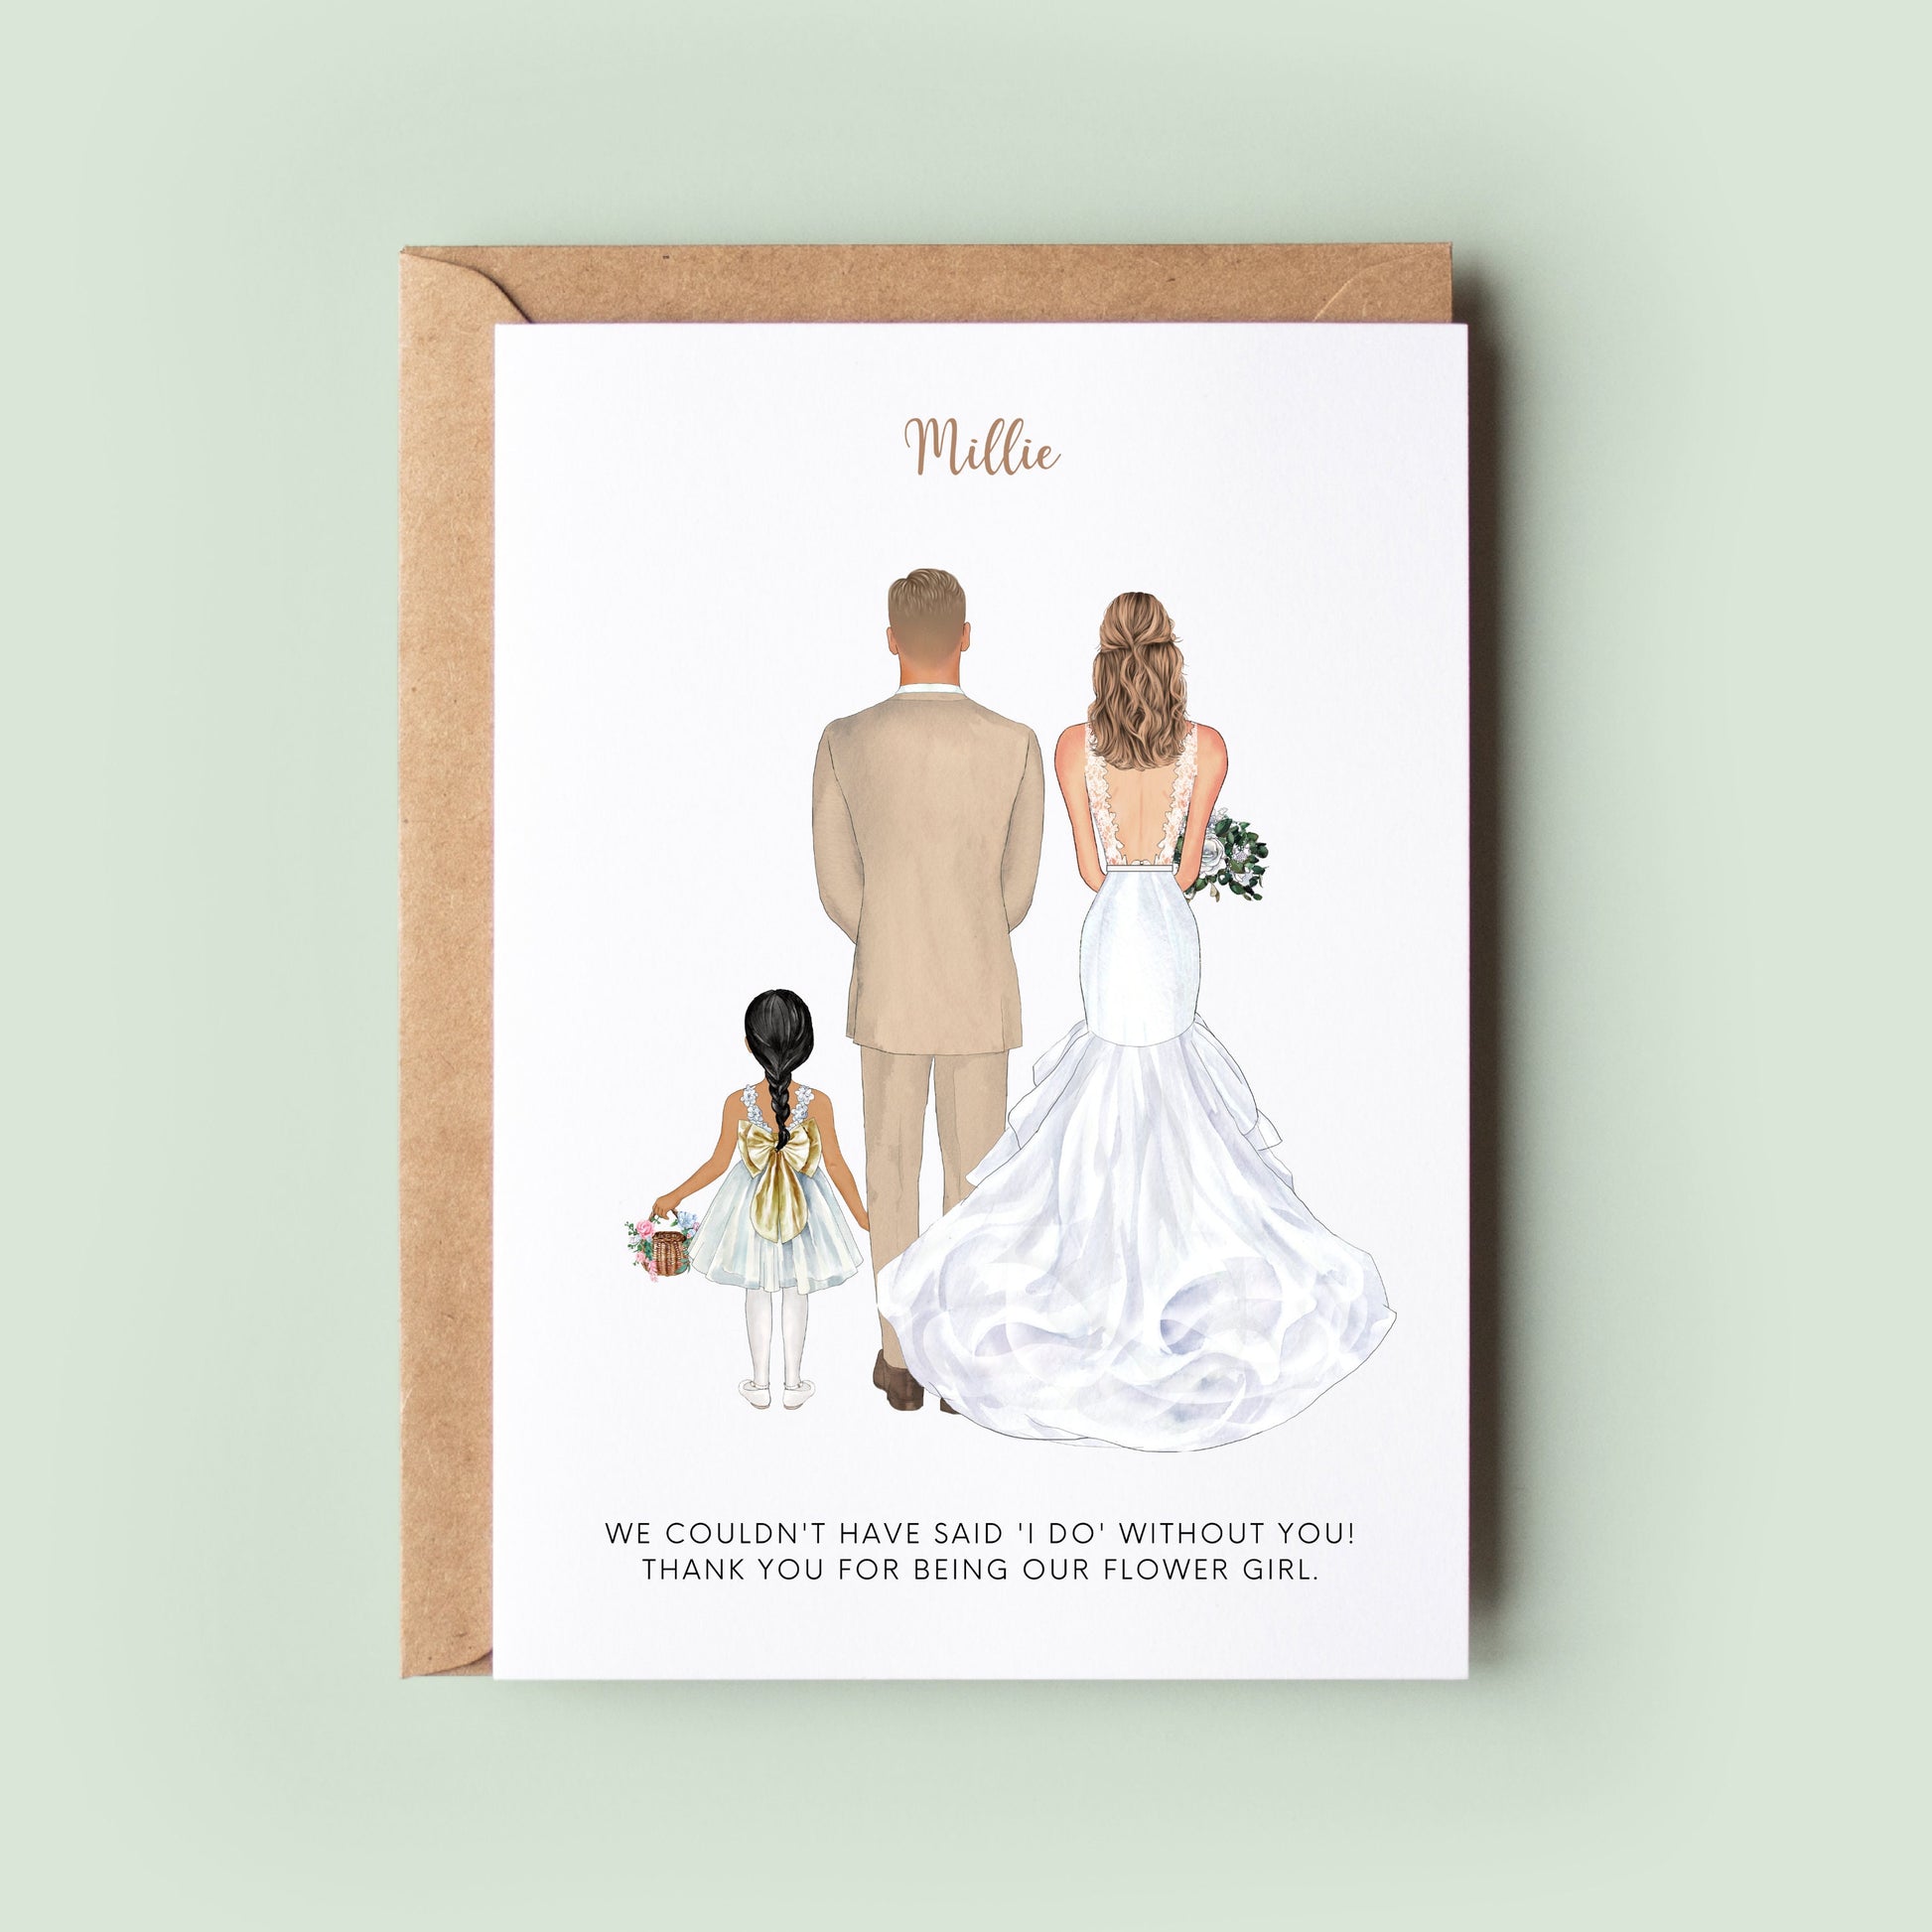 Personalised Thank You For Being Our Flower Girl Card, Wedding Thank You Card, Card For Flower Girl, Flower Girl Thank You Card, Keepsake